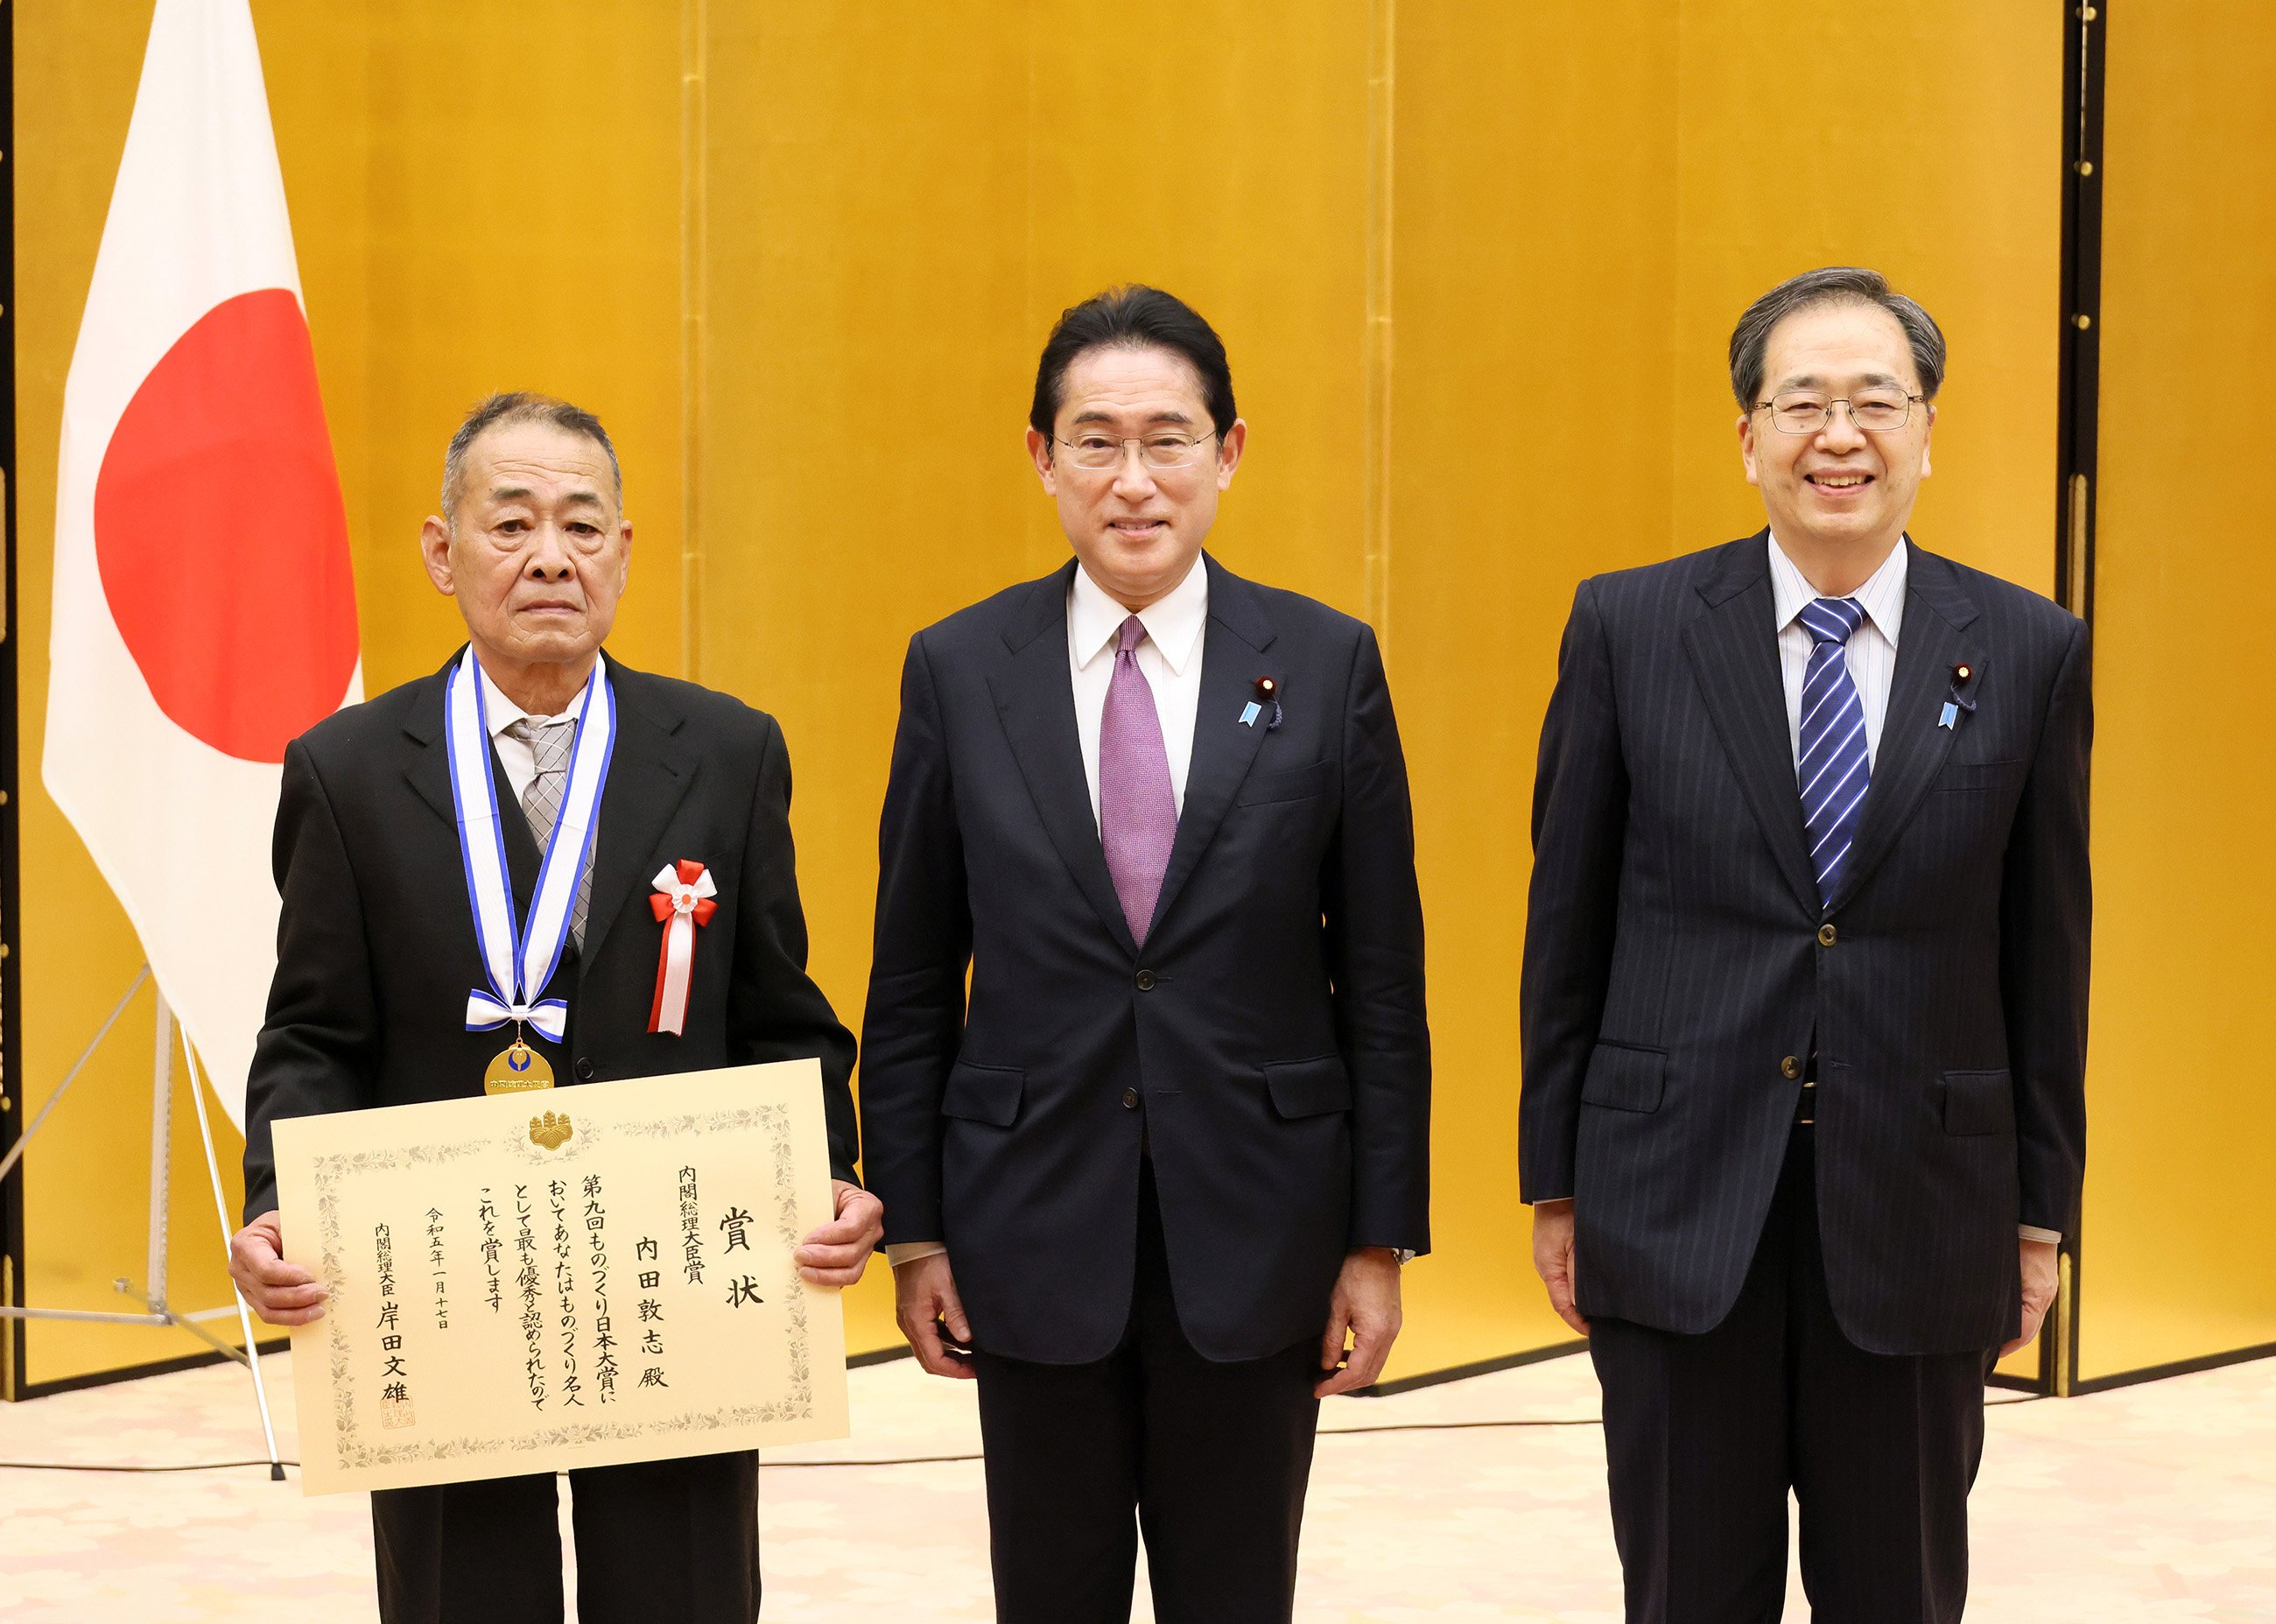 Commemorative photo session with award winners (4)